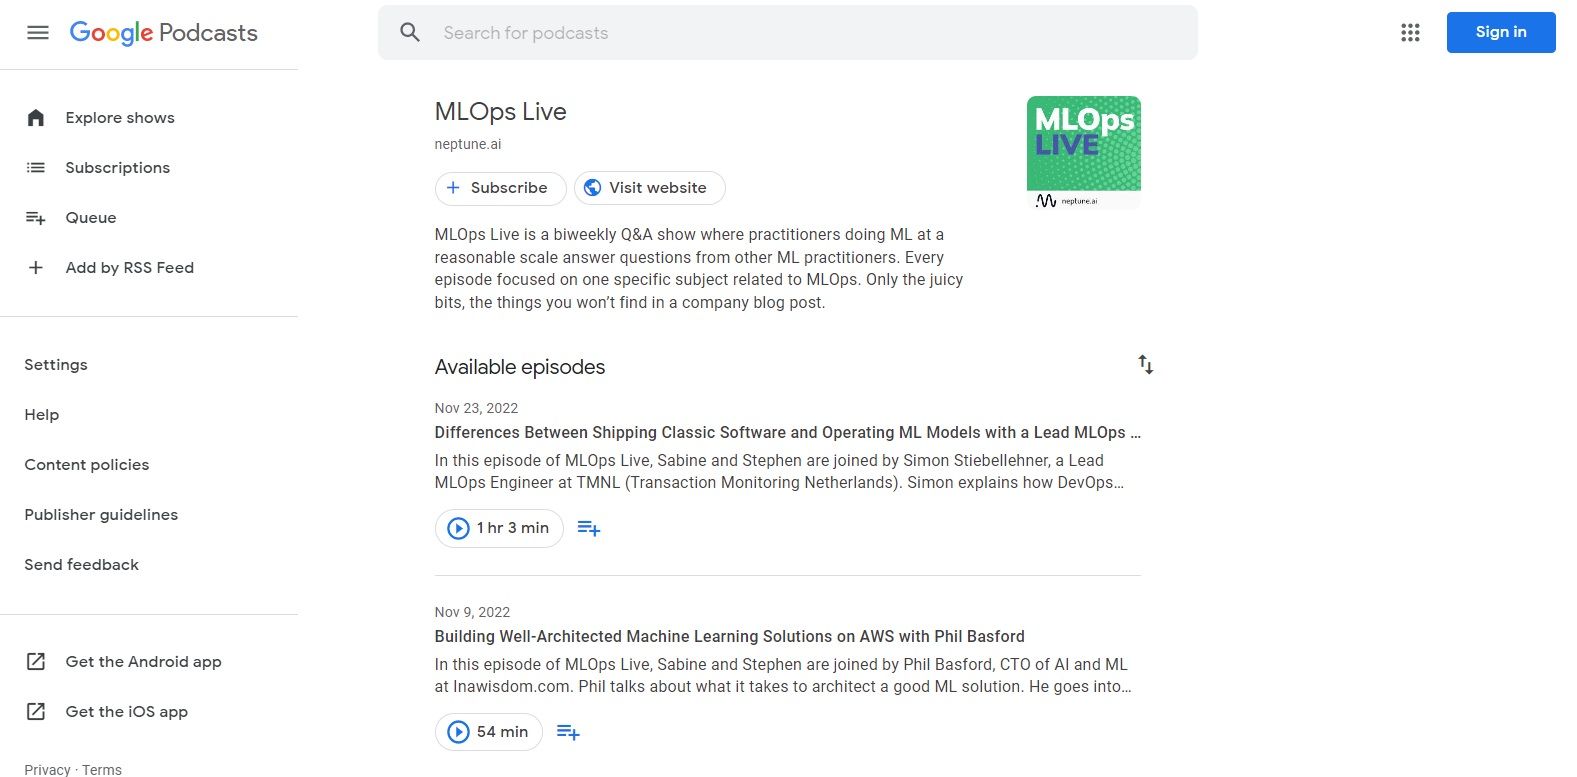 A screenshot of the MLOps Live podcast overview